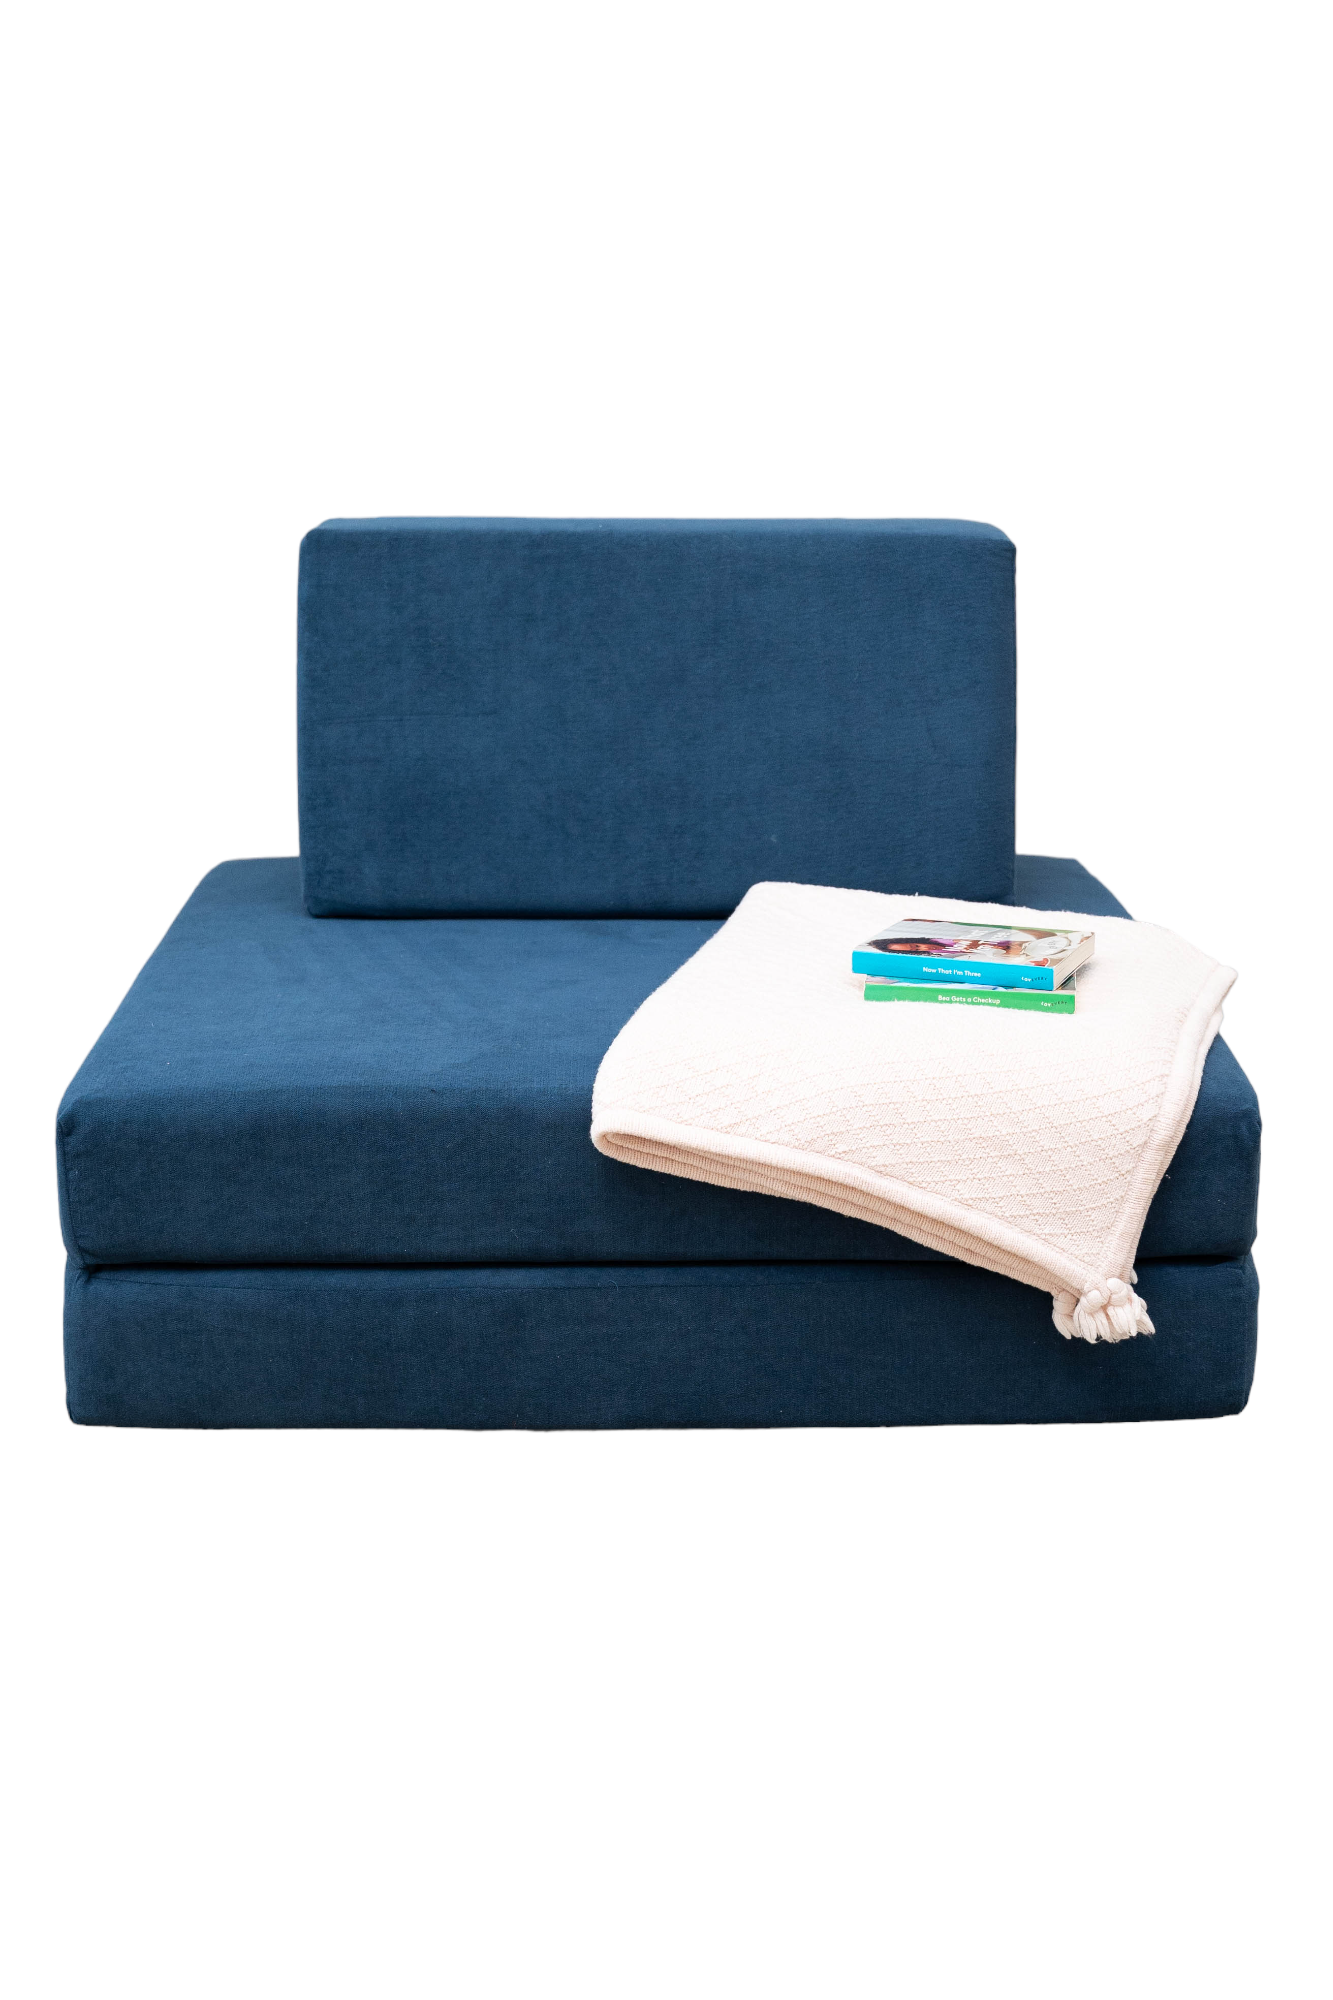 Acorn Couch  Multi-functional & Fun Play Couches